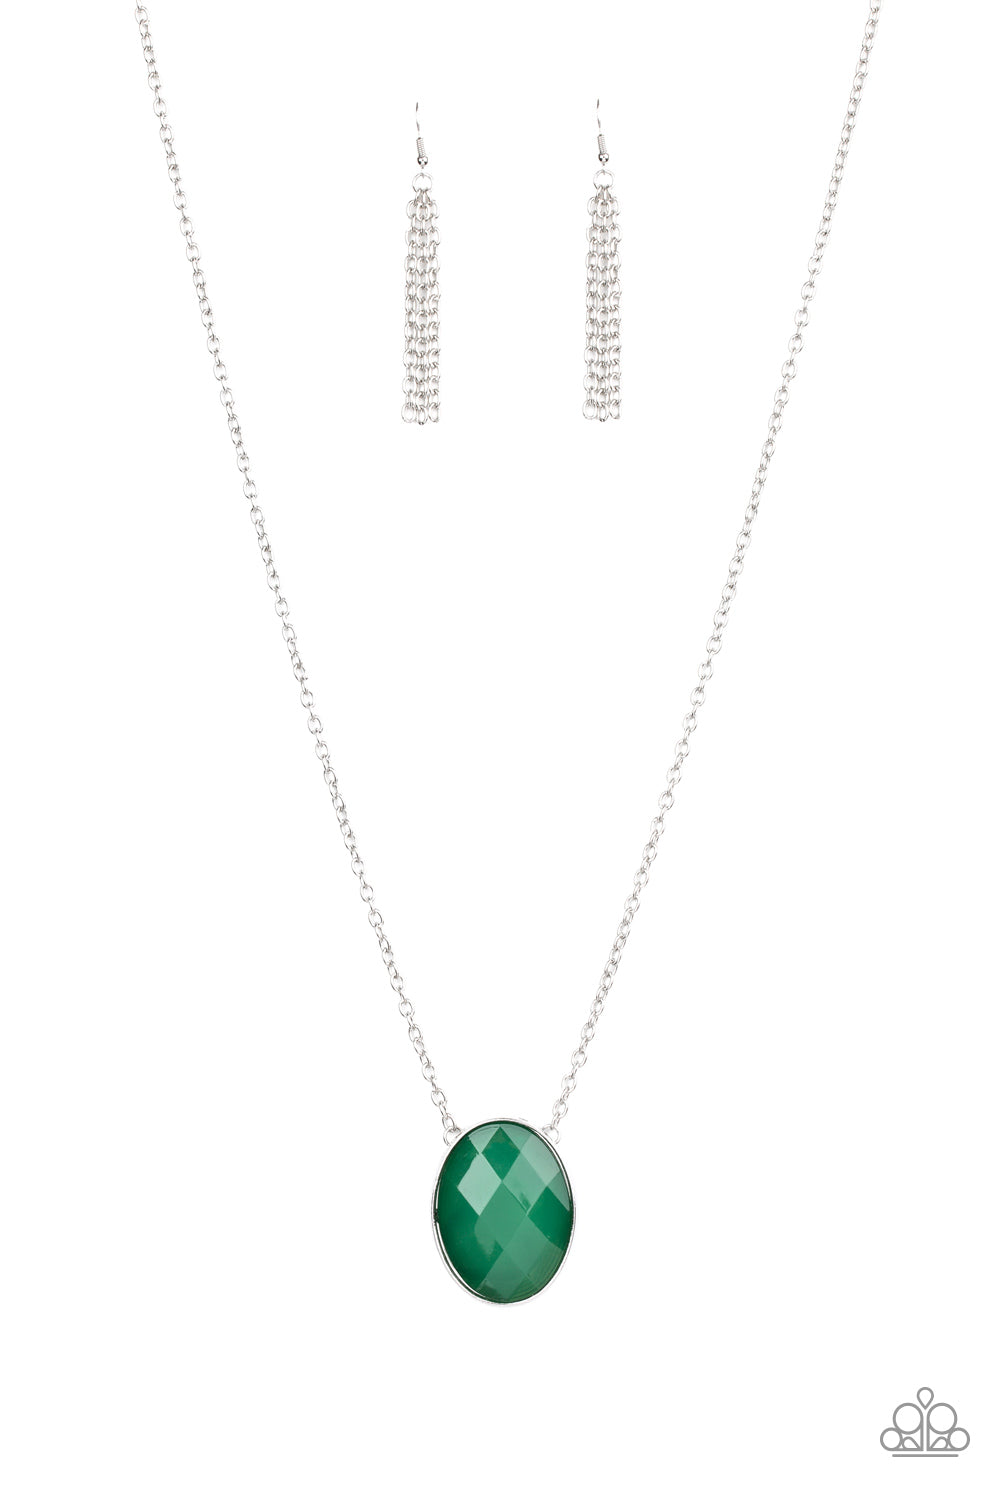 Paparazzi Accessories - Intensely Illuminated - Green Necklace - Alies Bling Bar